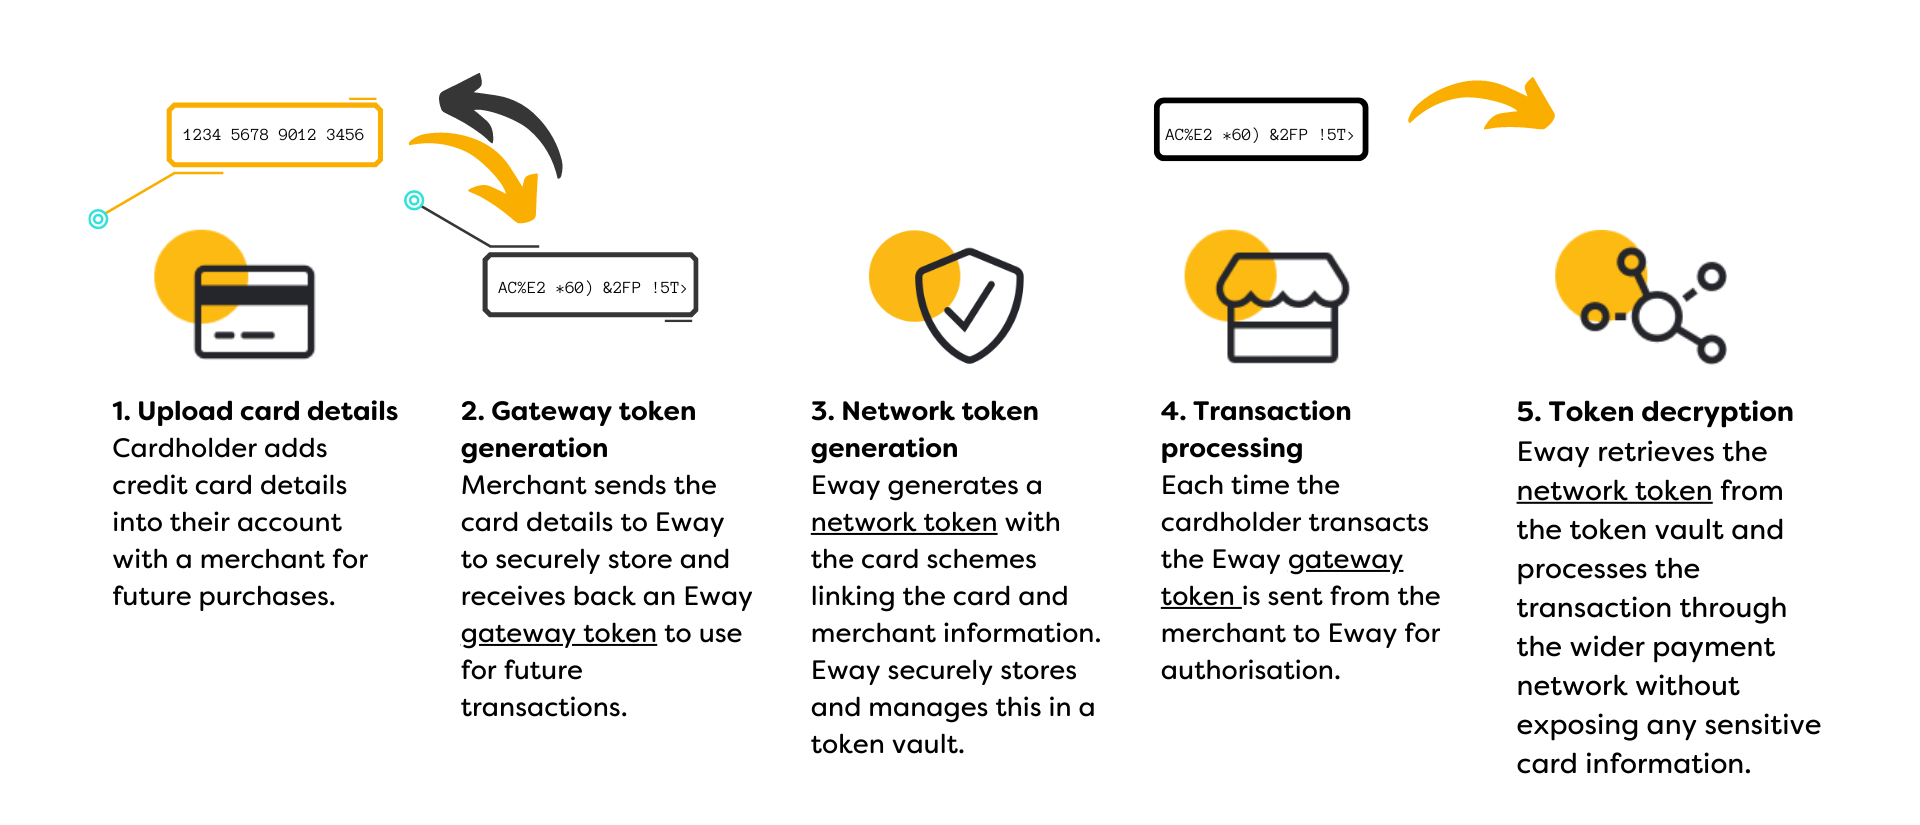 Diagram showing steps in tokenisation process